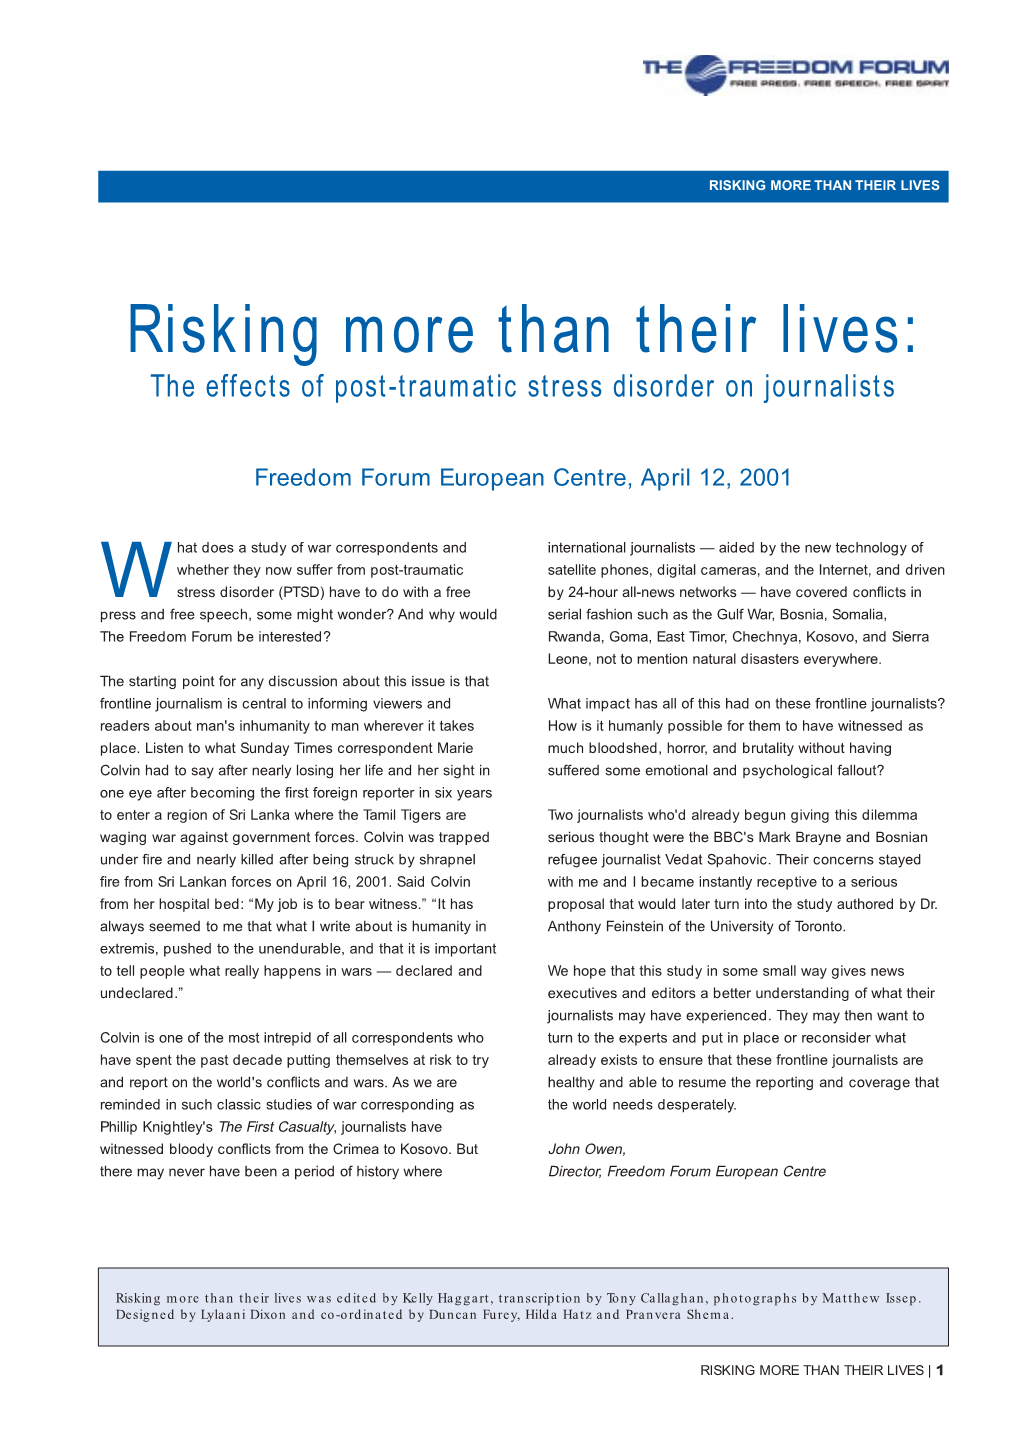 Risking More Than Their Lives: the Effects of Post-Traumatic Stress Disorder on Journalists